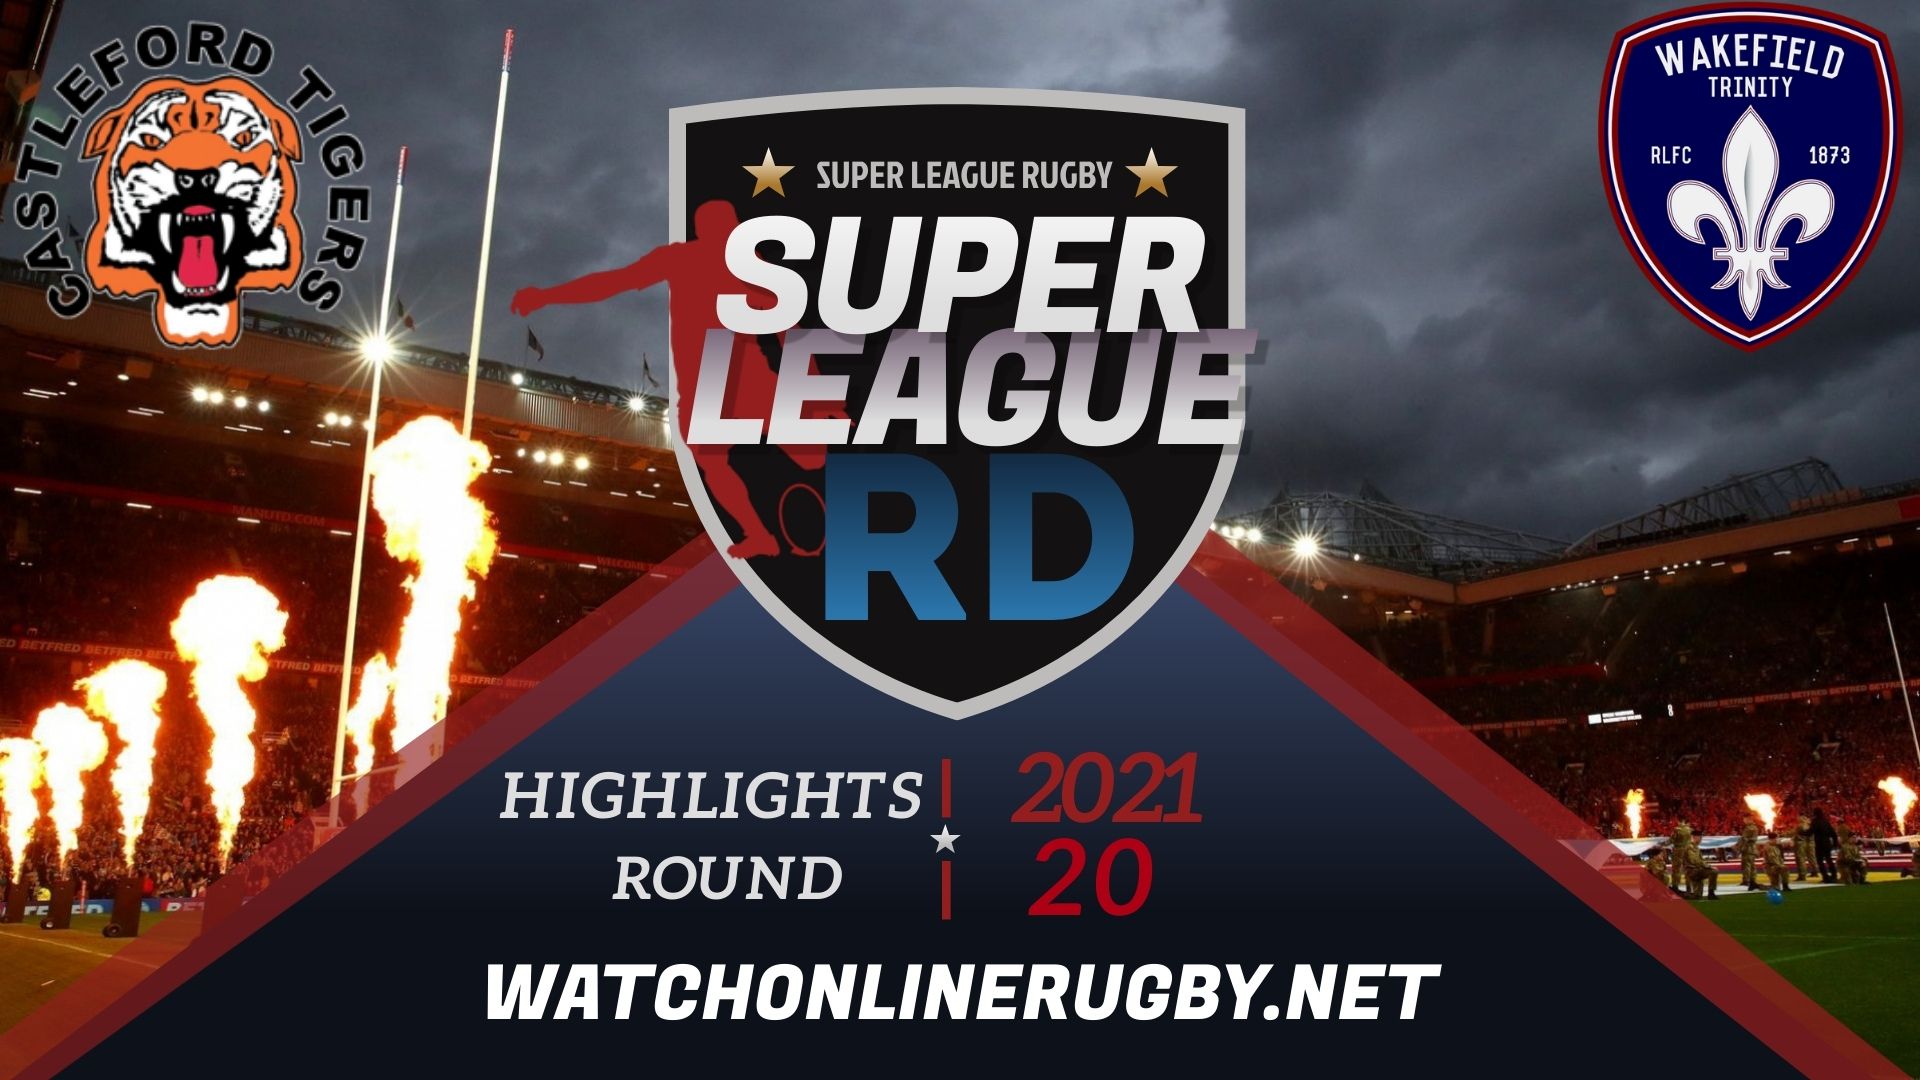 Castleford Tigers Vs Wakefield Trinity Super League Rugby 2021 RD 20